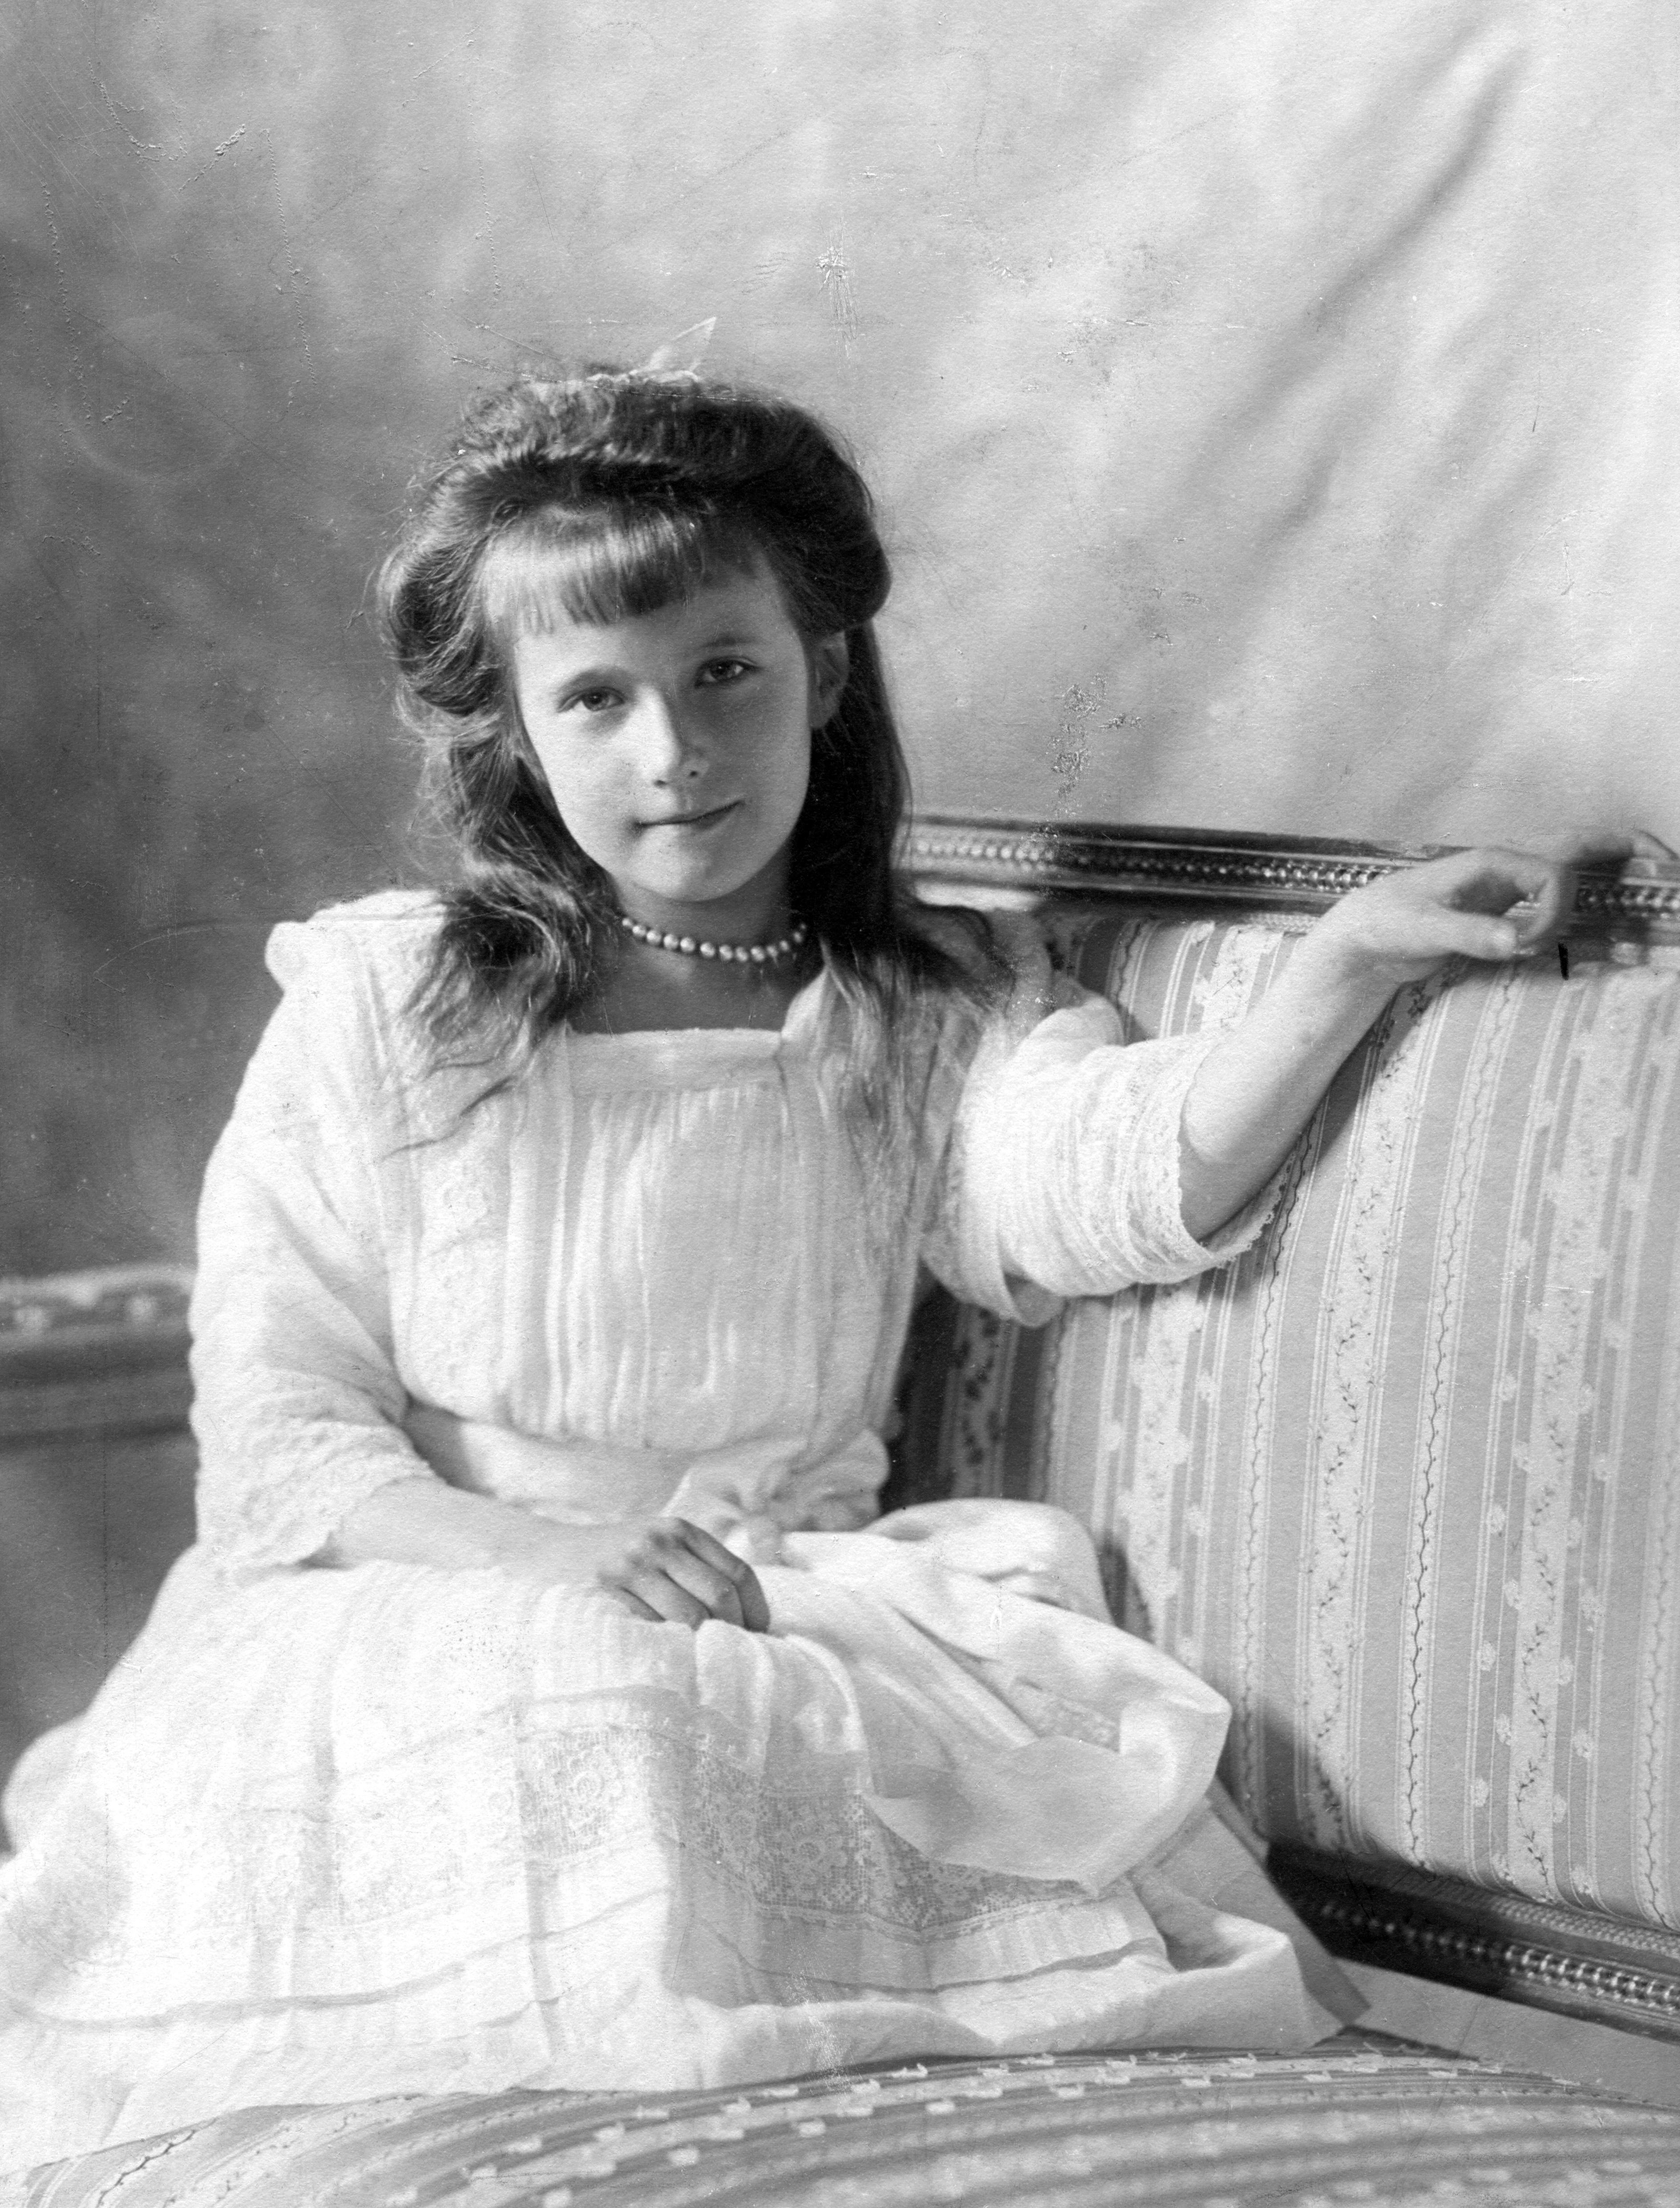 A Black and white photo of the real Anastasia as a child sitting on a couch while wearing a white dress,